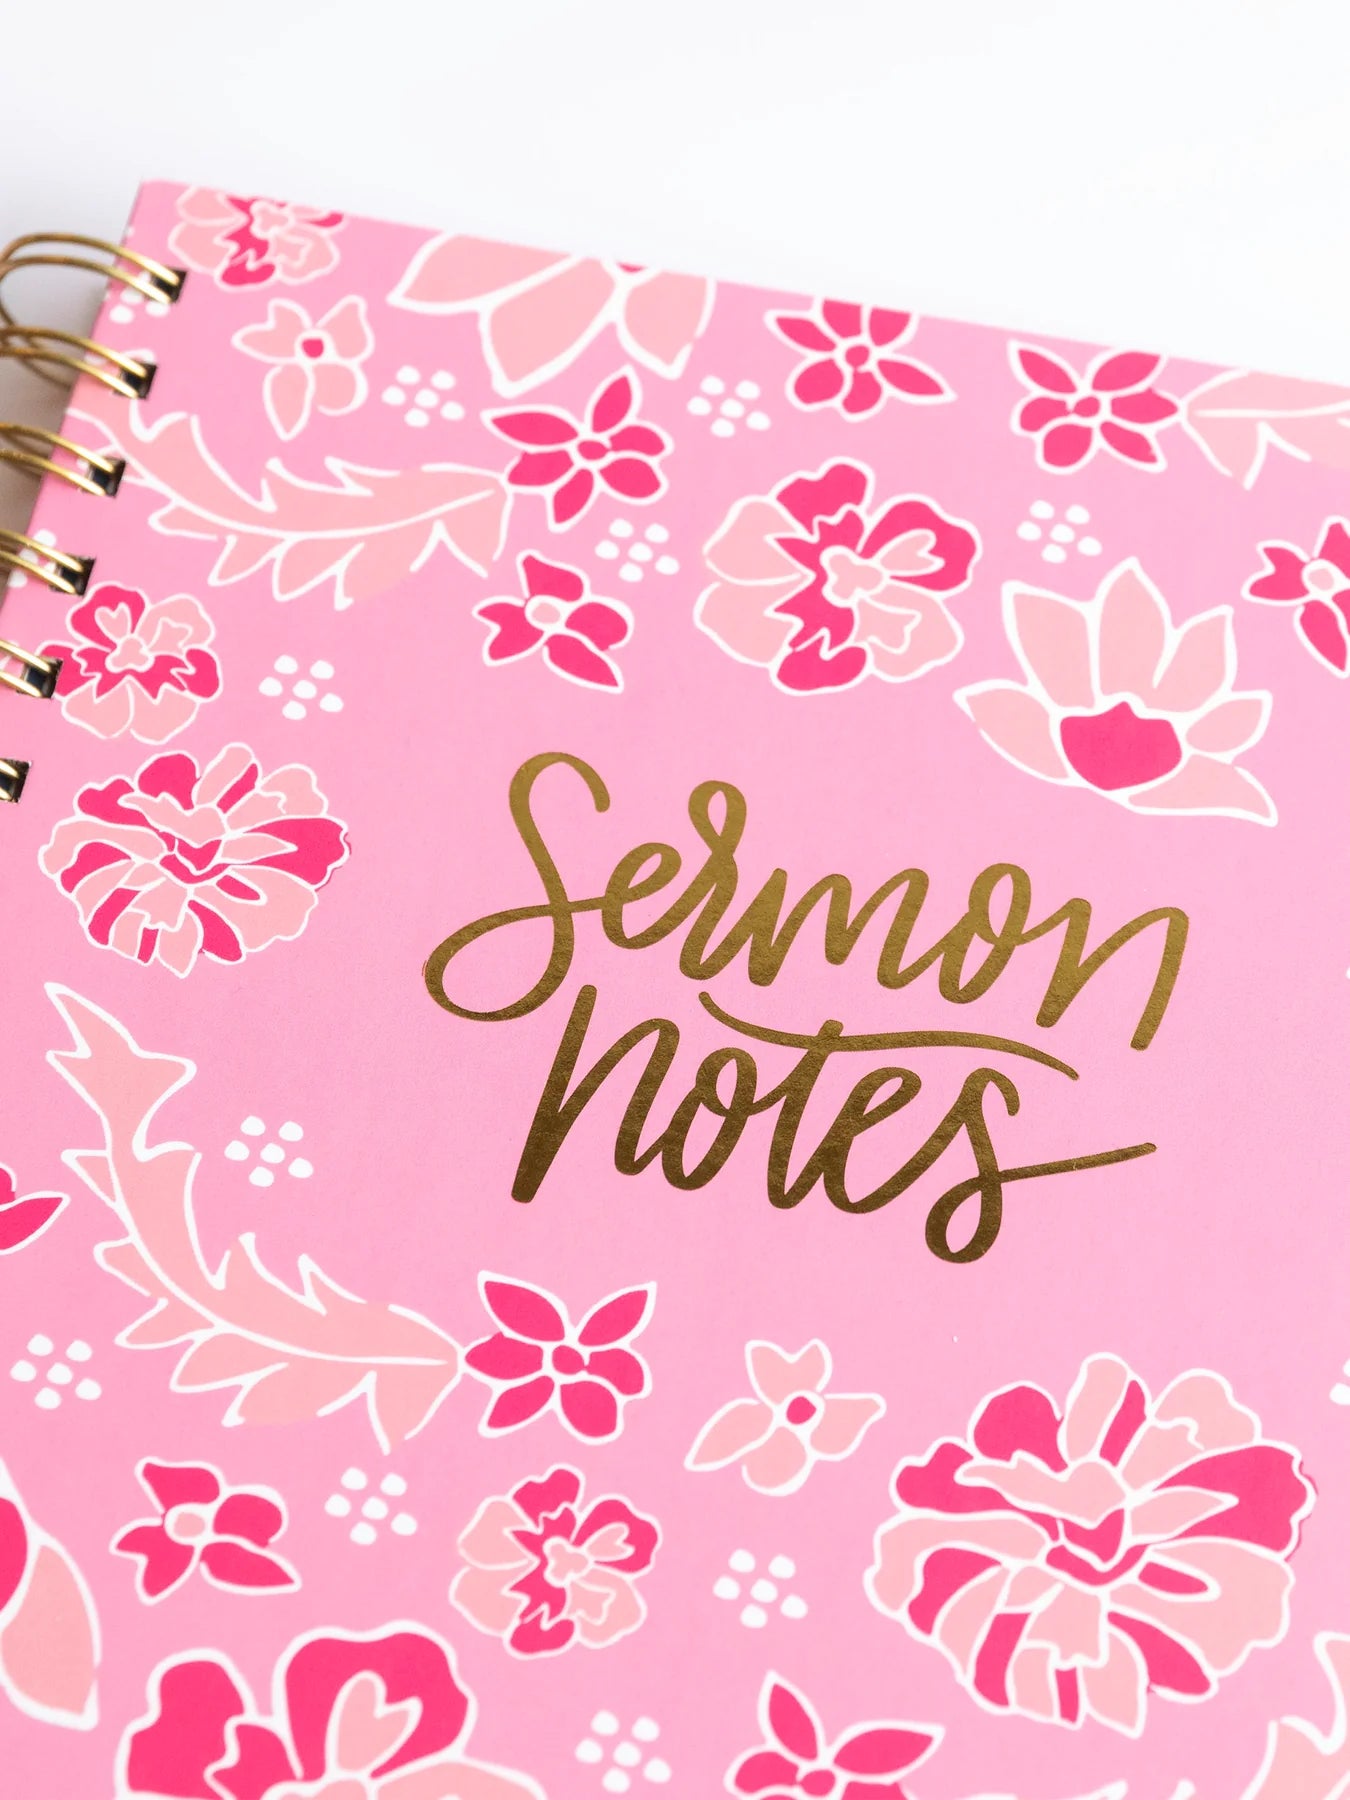 Mary Square Sermon Notes Journal | Riviera Blossoms